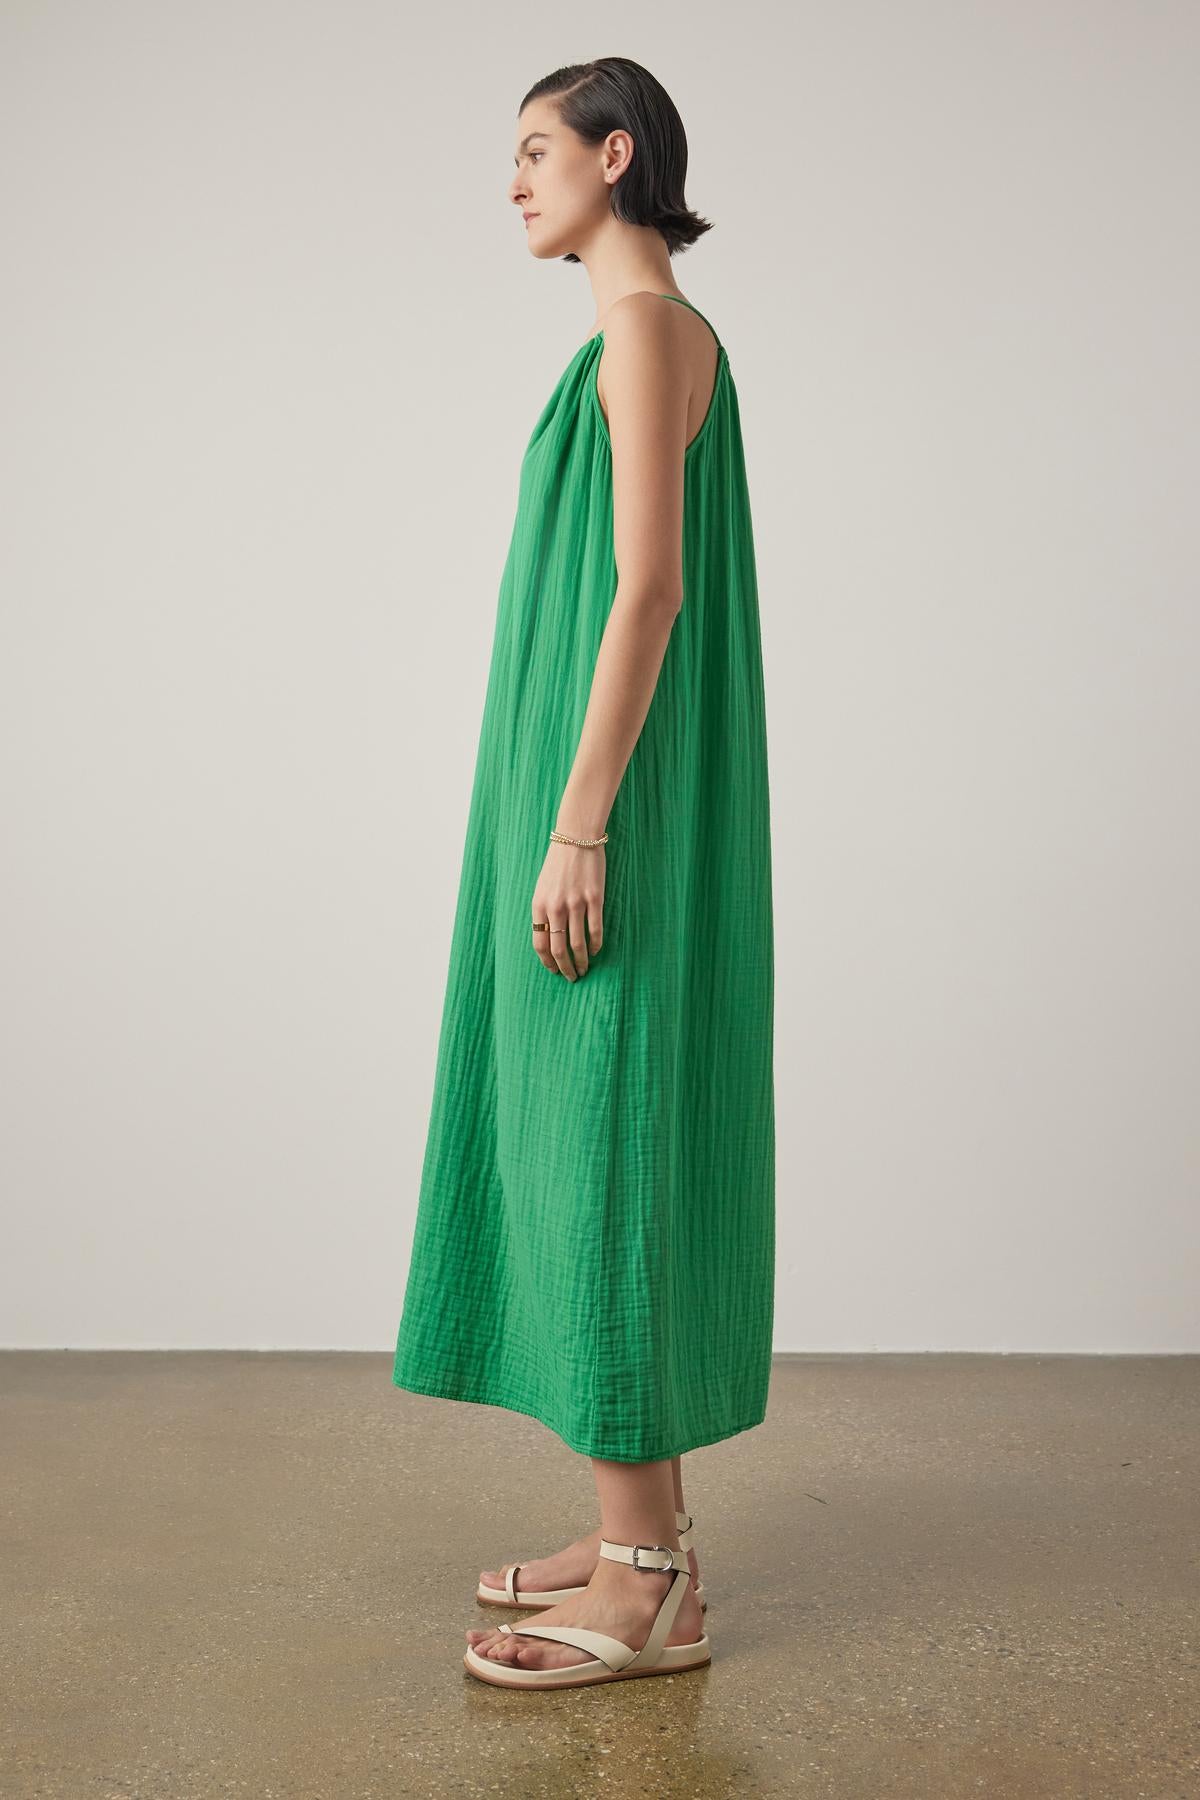 A woman standing in profile, wearing a long green sleeveless Carrillo dress by Velvet by Jenny Graham and beige sandals, against a neutral background.-36863272124609